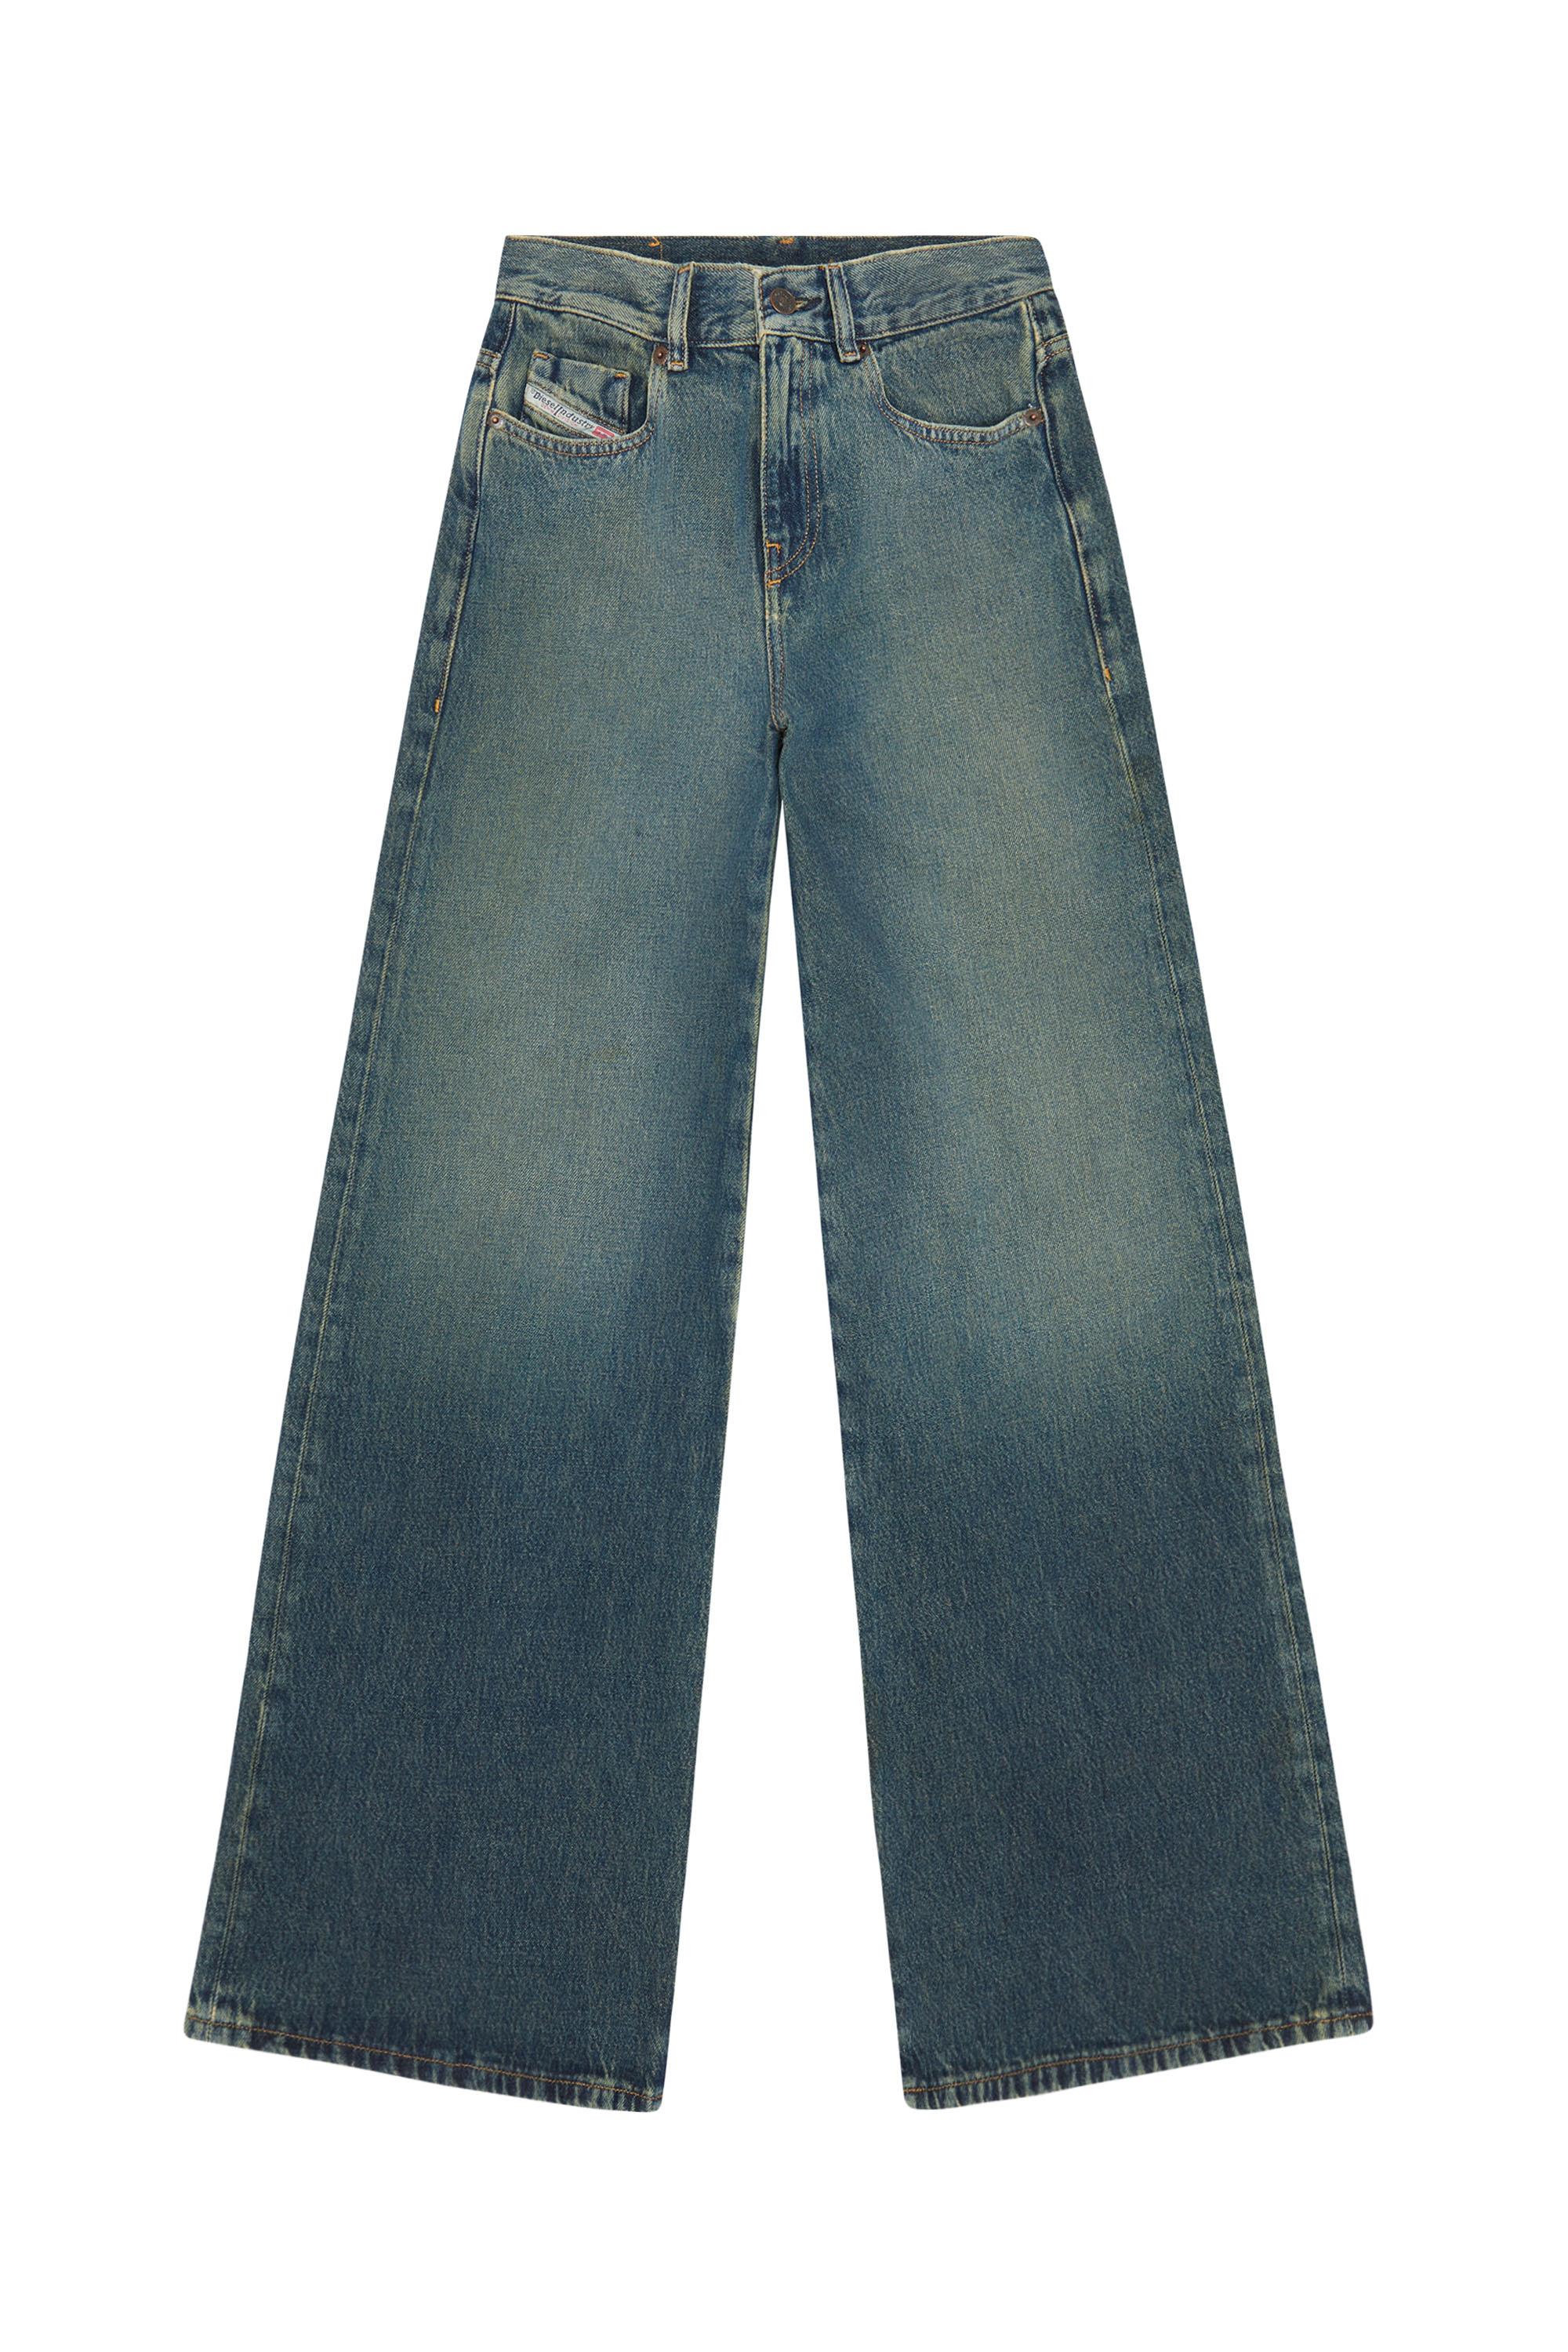 1978 D-AKEMI 09C04 Bootcut and Flare Jeans, Dark Blue - Jeans